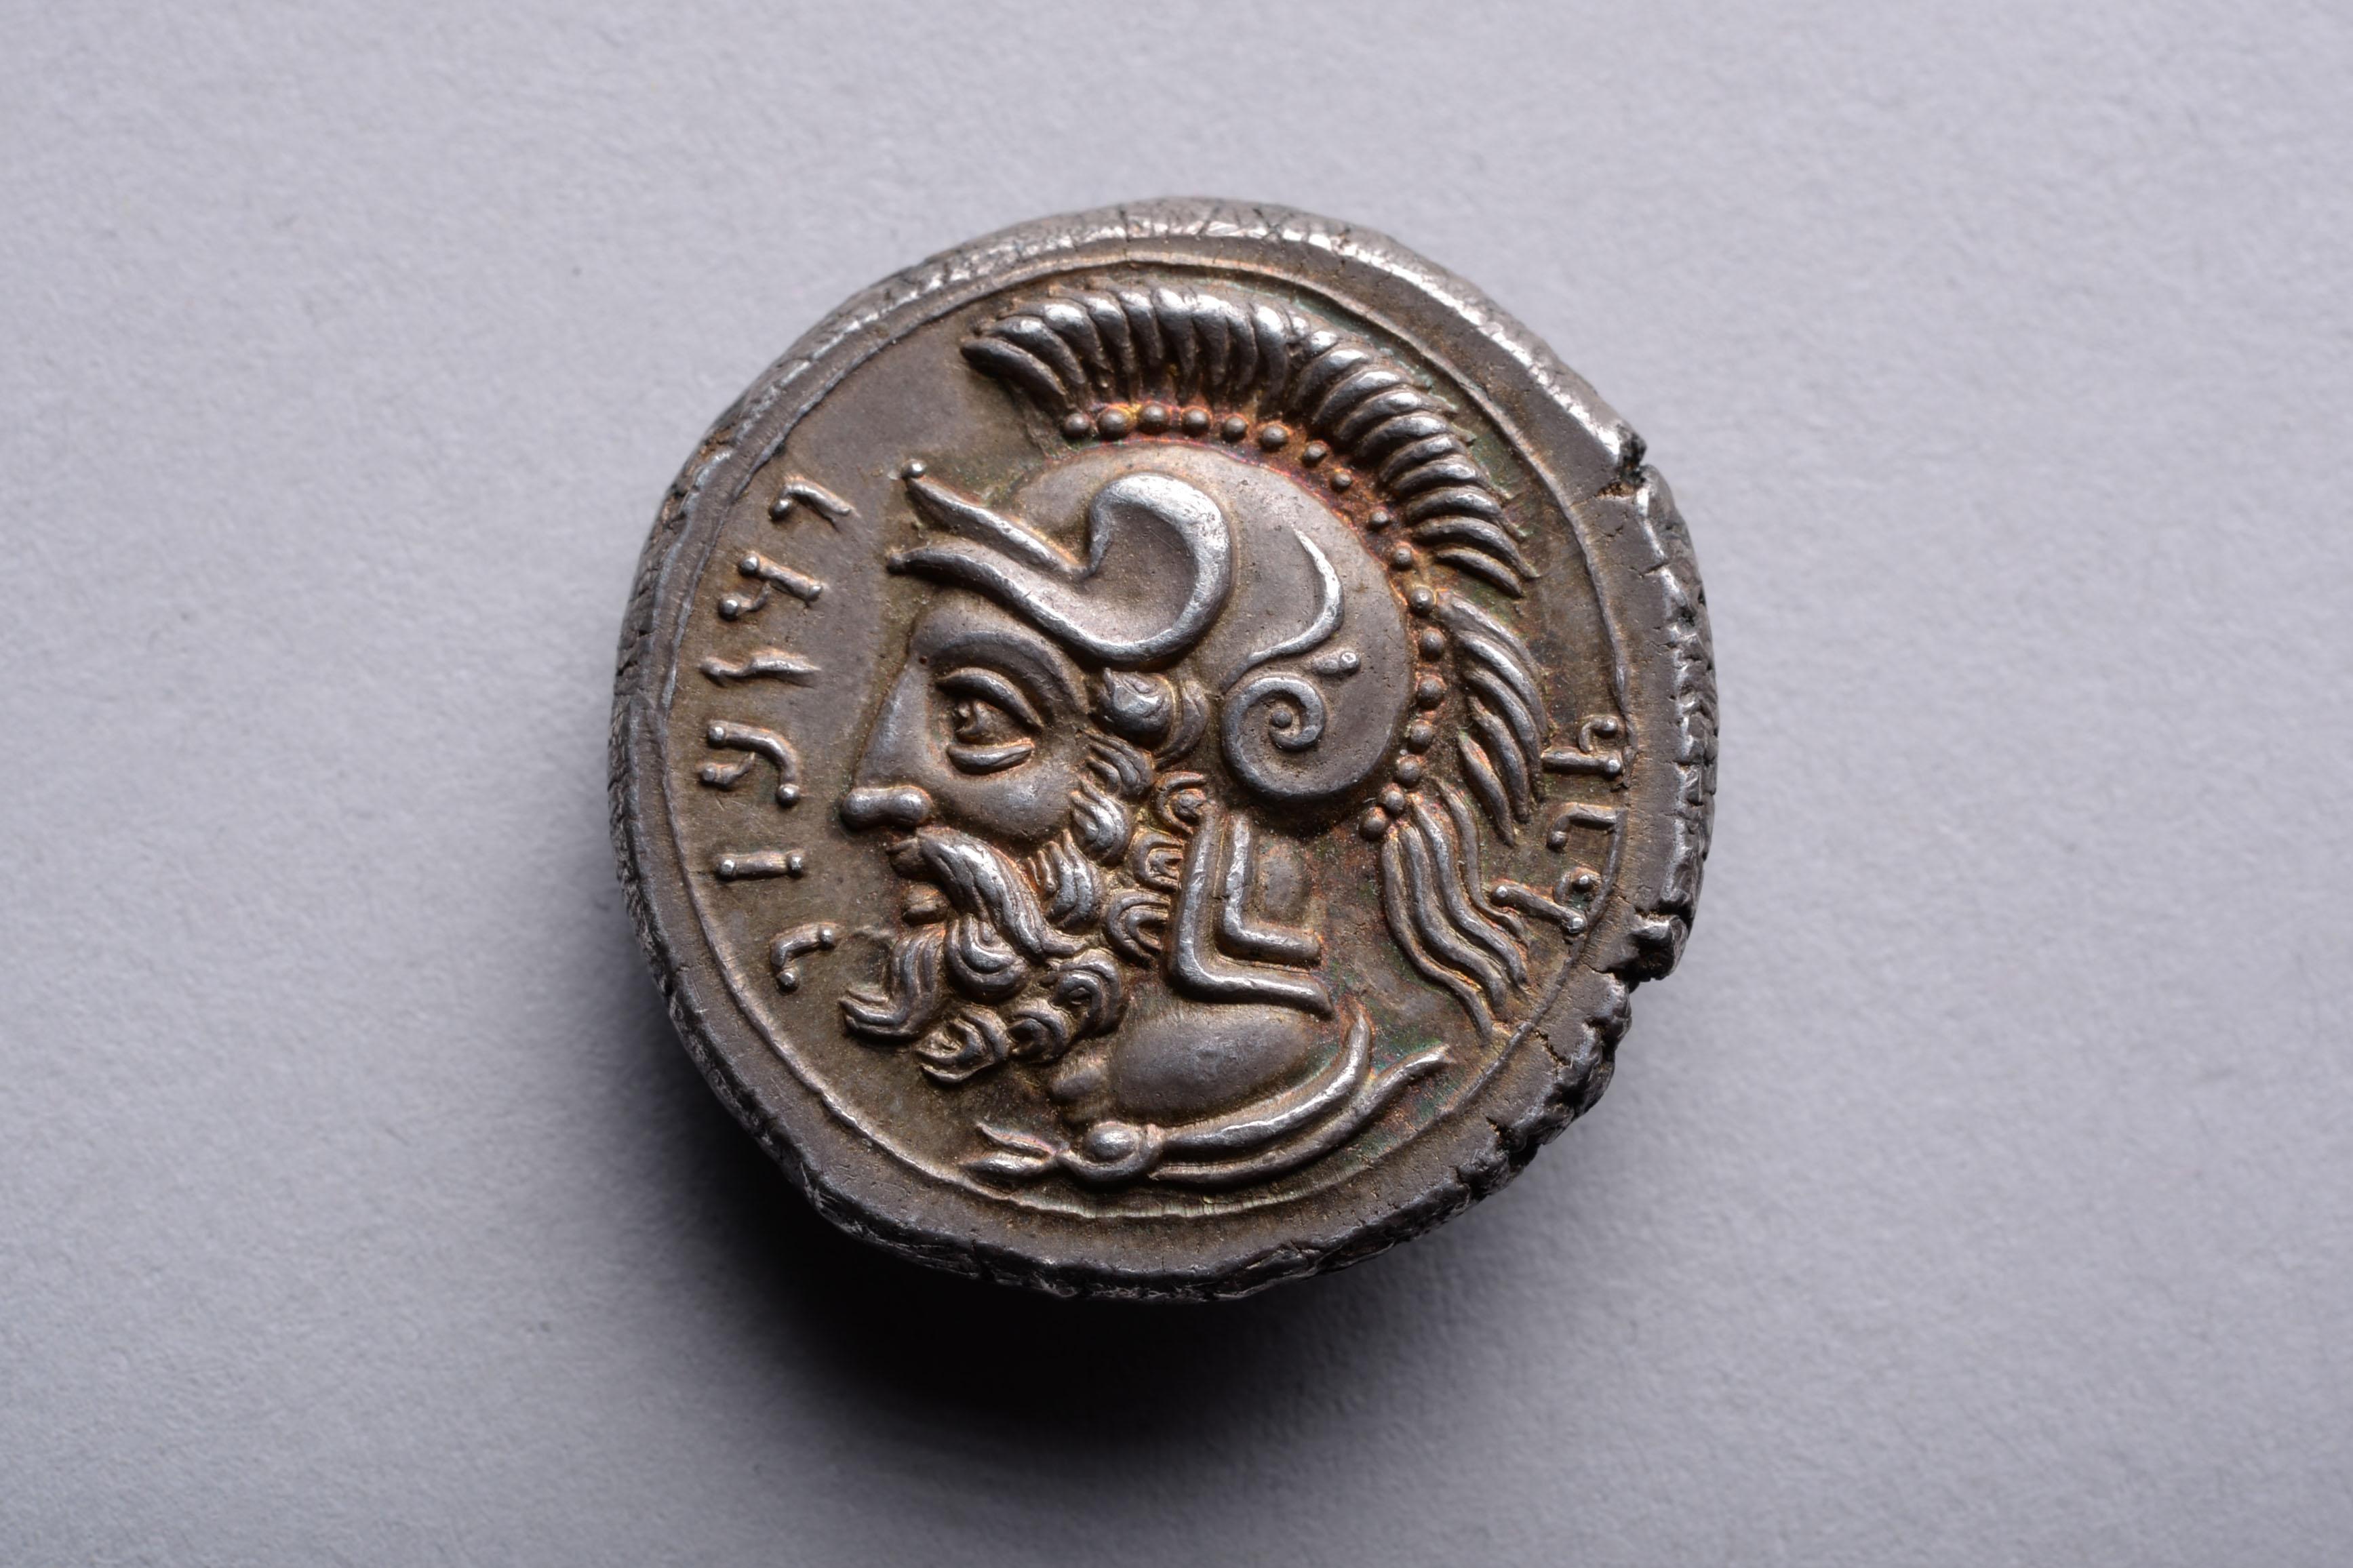 One of the finest known silver staters minted under the mysterious Persian military commander Pharnabazos II, in the city of Tarsos, Cilicia, modern-day Turkey.

The obverse with the tutelary deity of Tarsos, Baaltars (